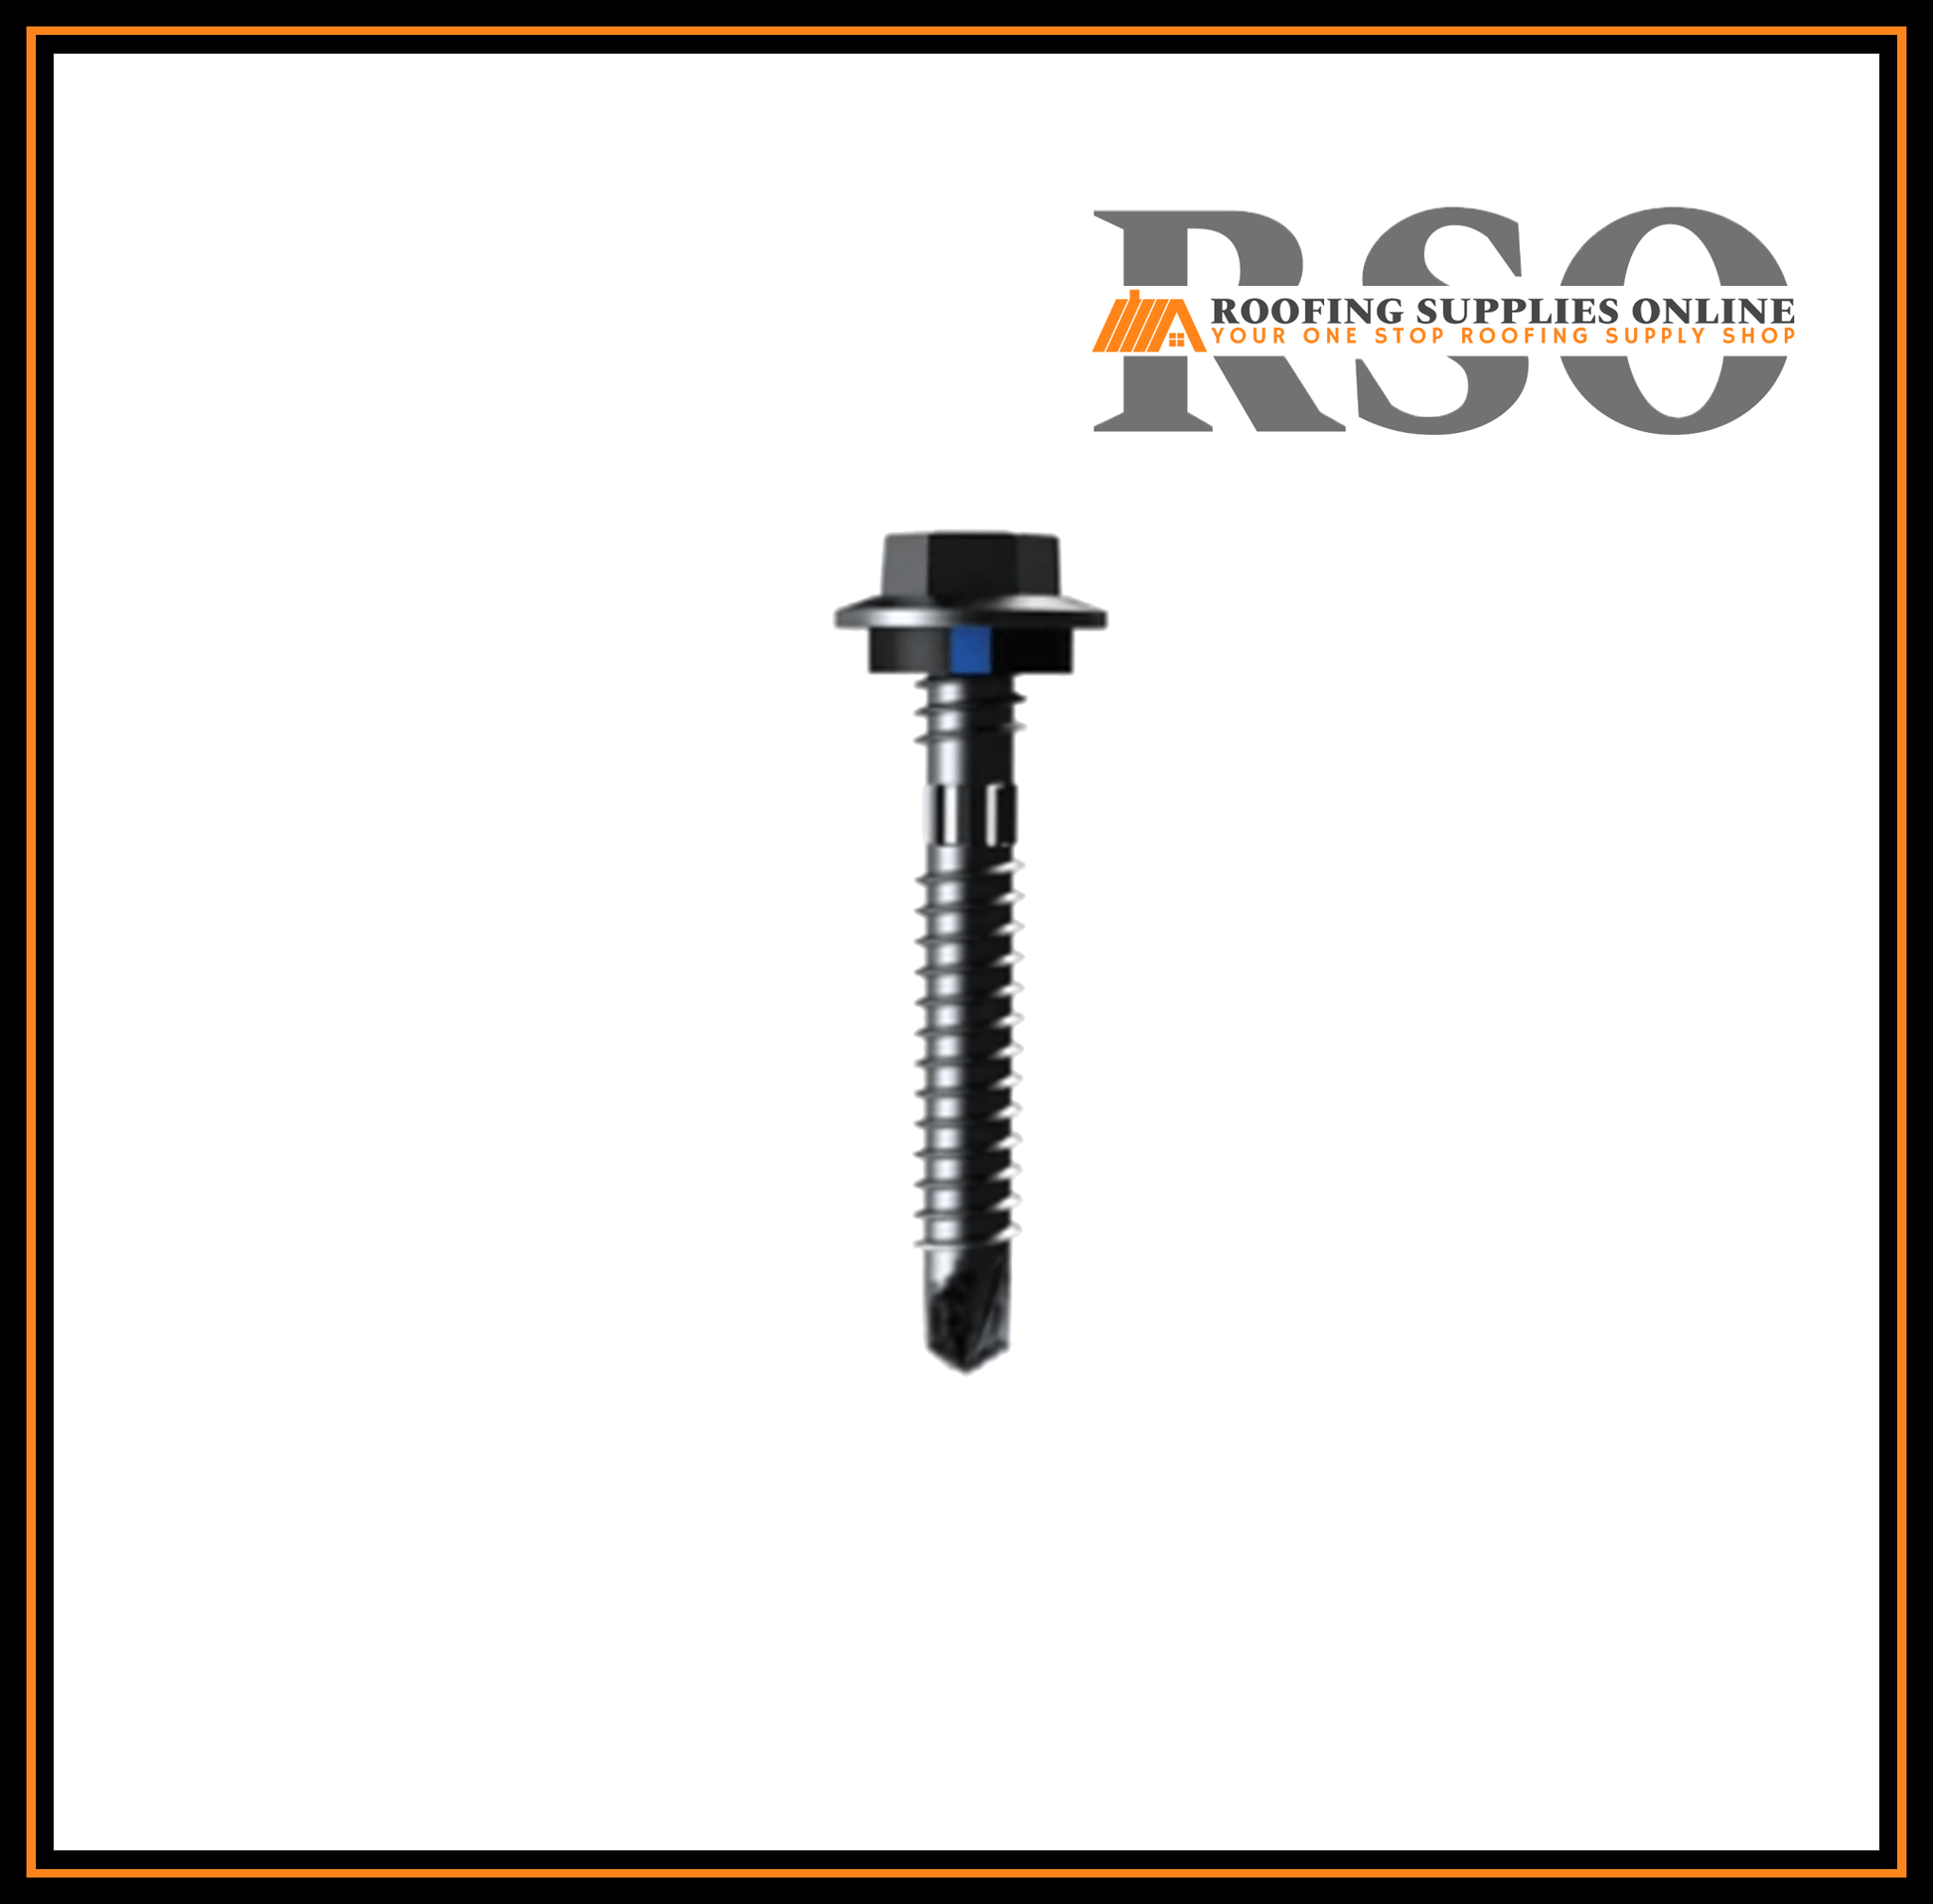 This image is of a 50mm HEX roof screw with a neoprene seal and has a cutting head that is suilted for fixing to metal battens